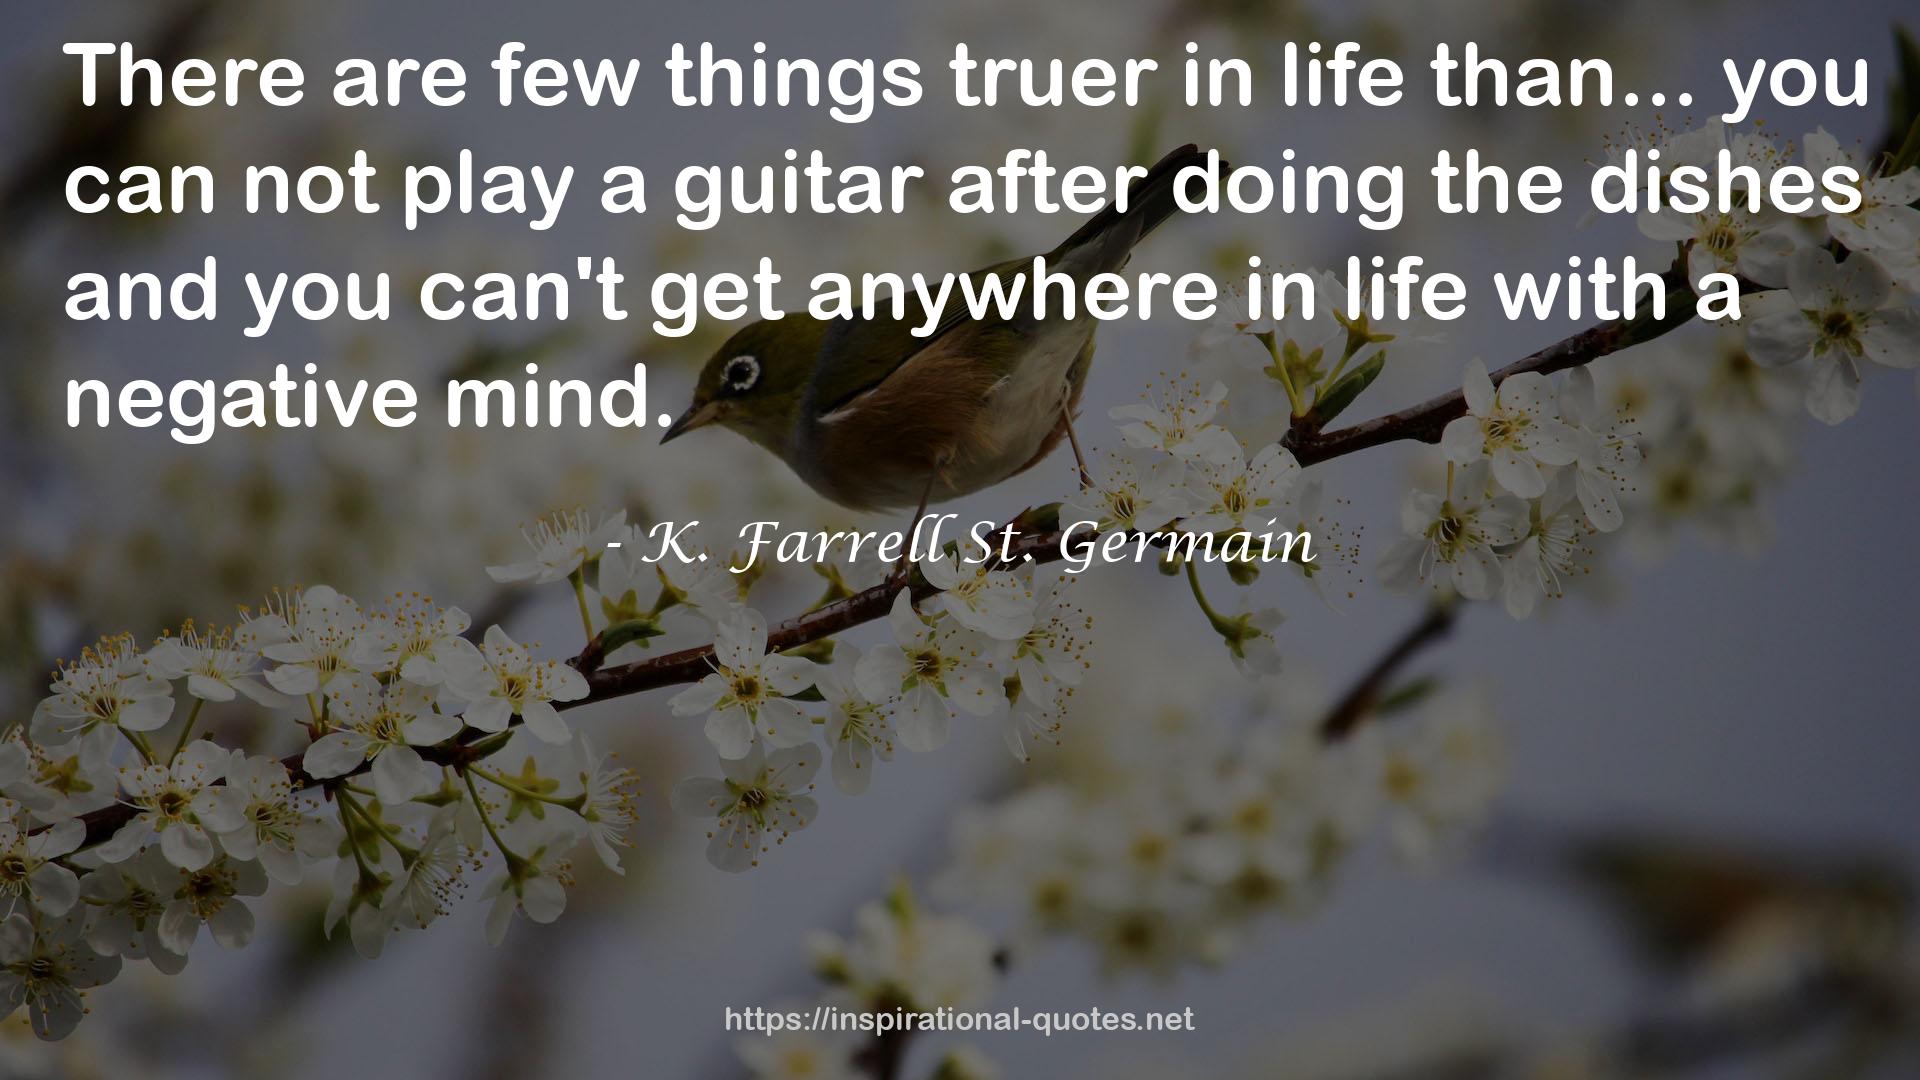 K. Farrell St. Germain QUOTES